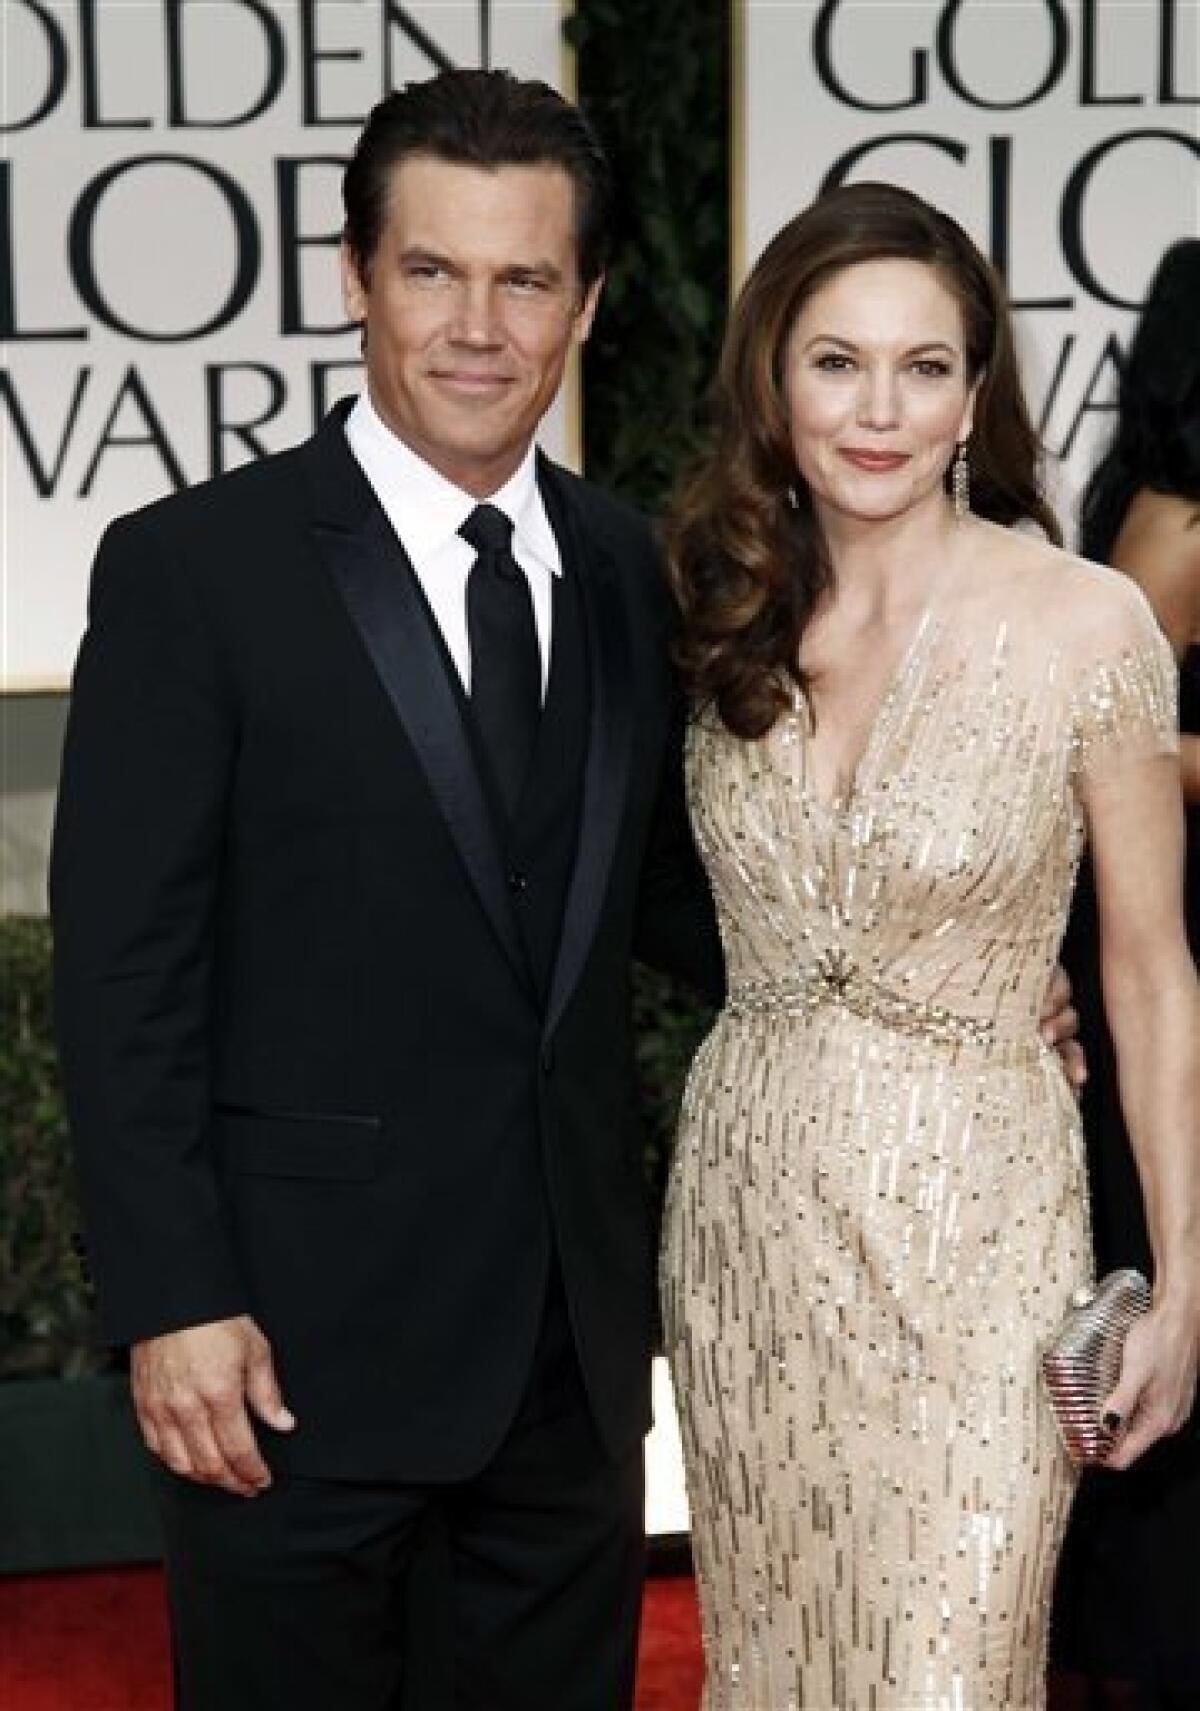 FILE - This Jan. 15, 2012 file photo shows actors Josh Brolin, left, and Diane Lane at the 69th Annual Golden Globe Awards in Los Angeles. Lane and Brolin are divorcing after eight years of marriage. A representative for the couple confirmed the split Thursday, Feb. 21, 2013. Brolin and Lane were married in 2004, the second marriage for both. (AP Photo/Matt Sayles, file)